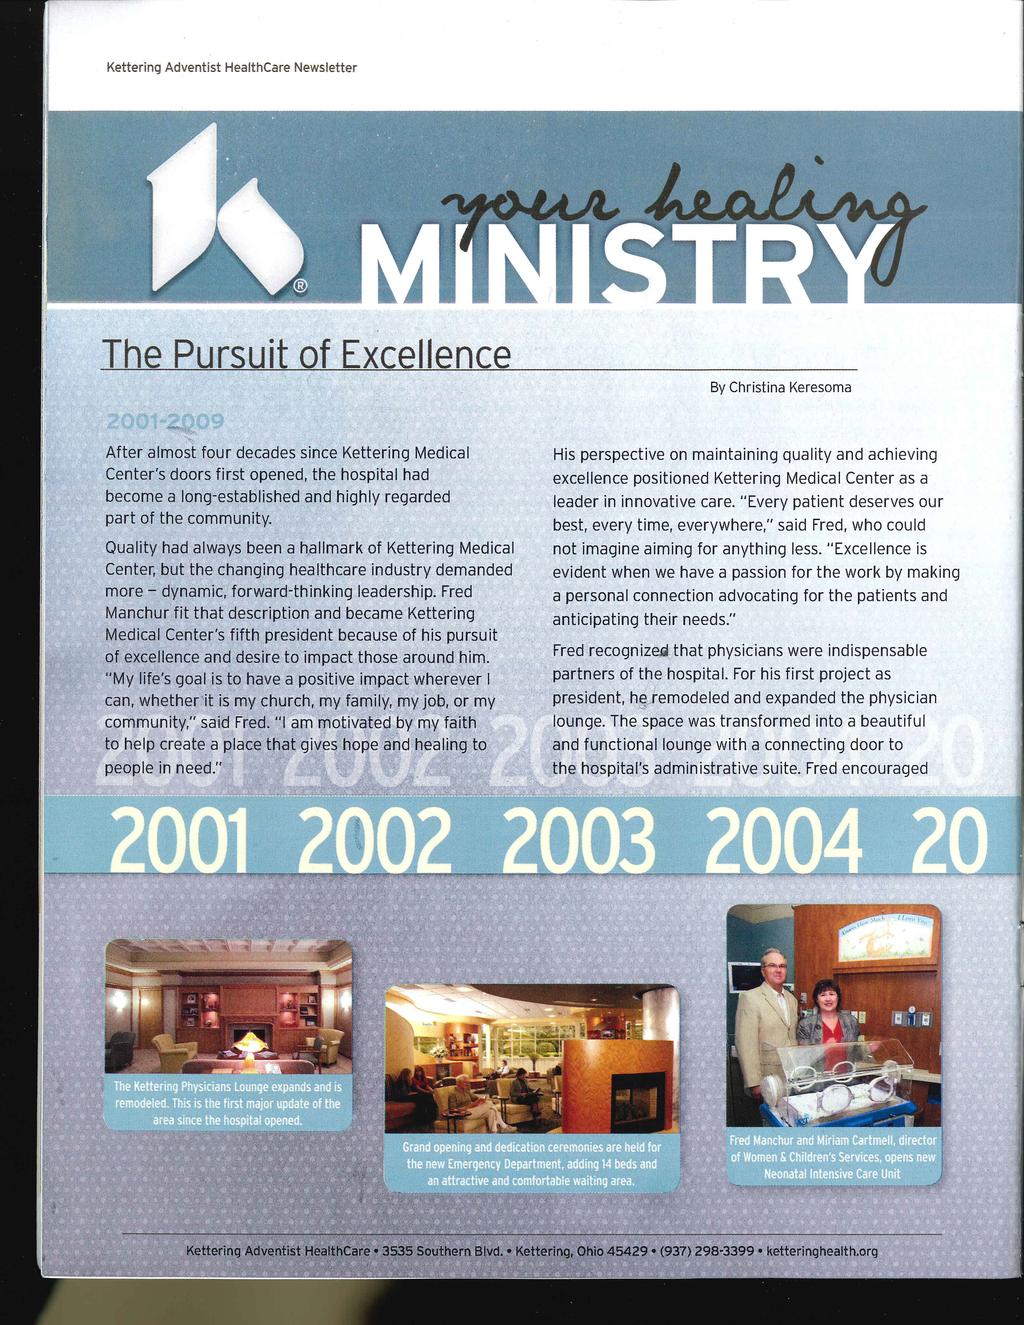 Kettering Adventist HealthCare Newsletter Thè Pursuit of-excellence By Christina Keresoma His perspective on maintaining quality and achieving excellence positioned Kettering Medical Center as a